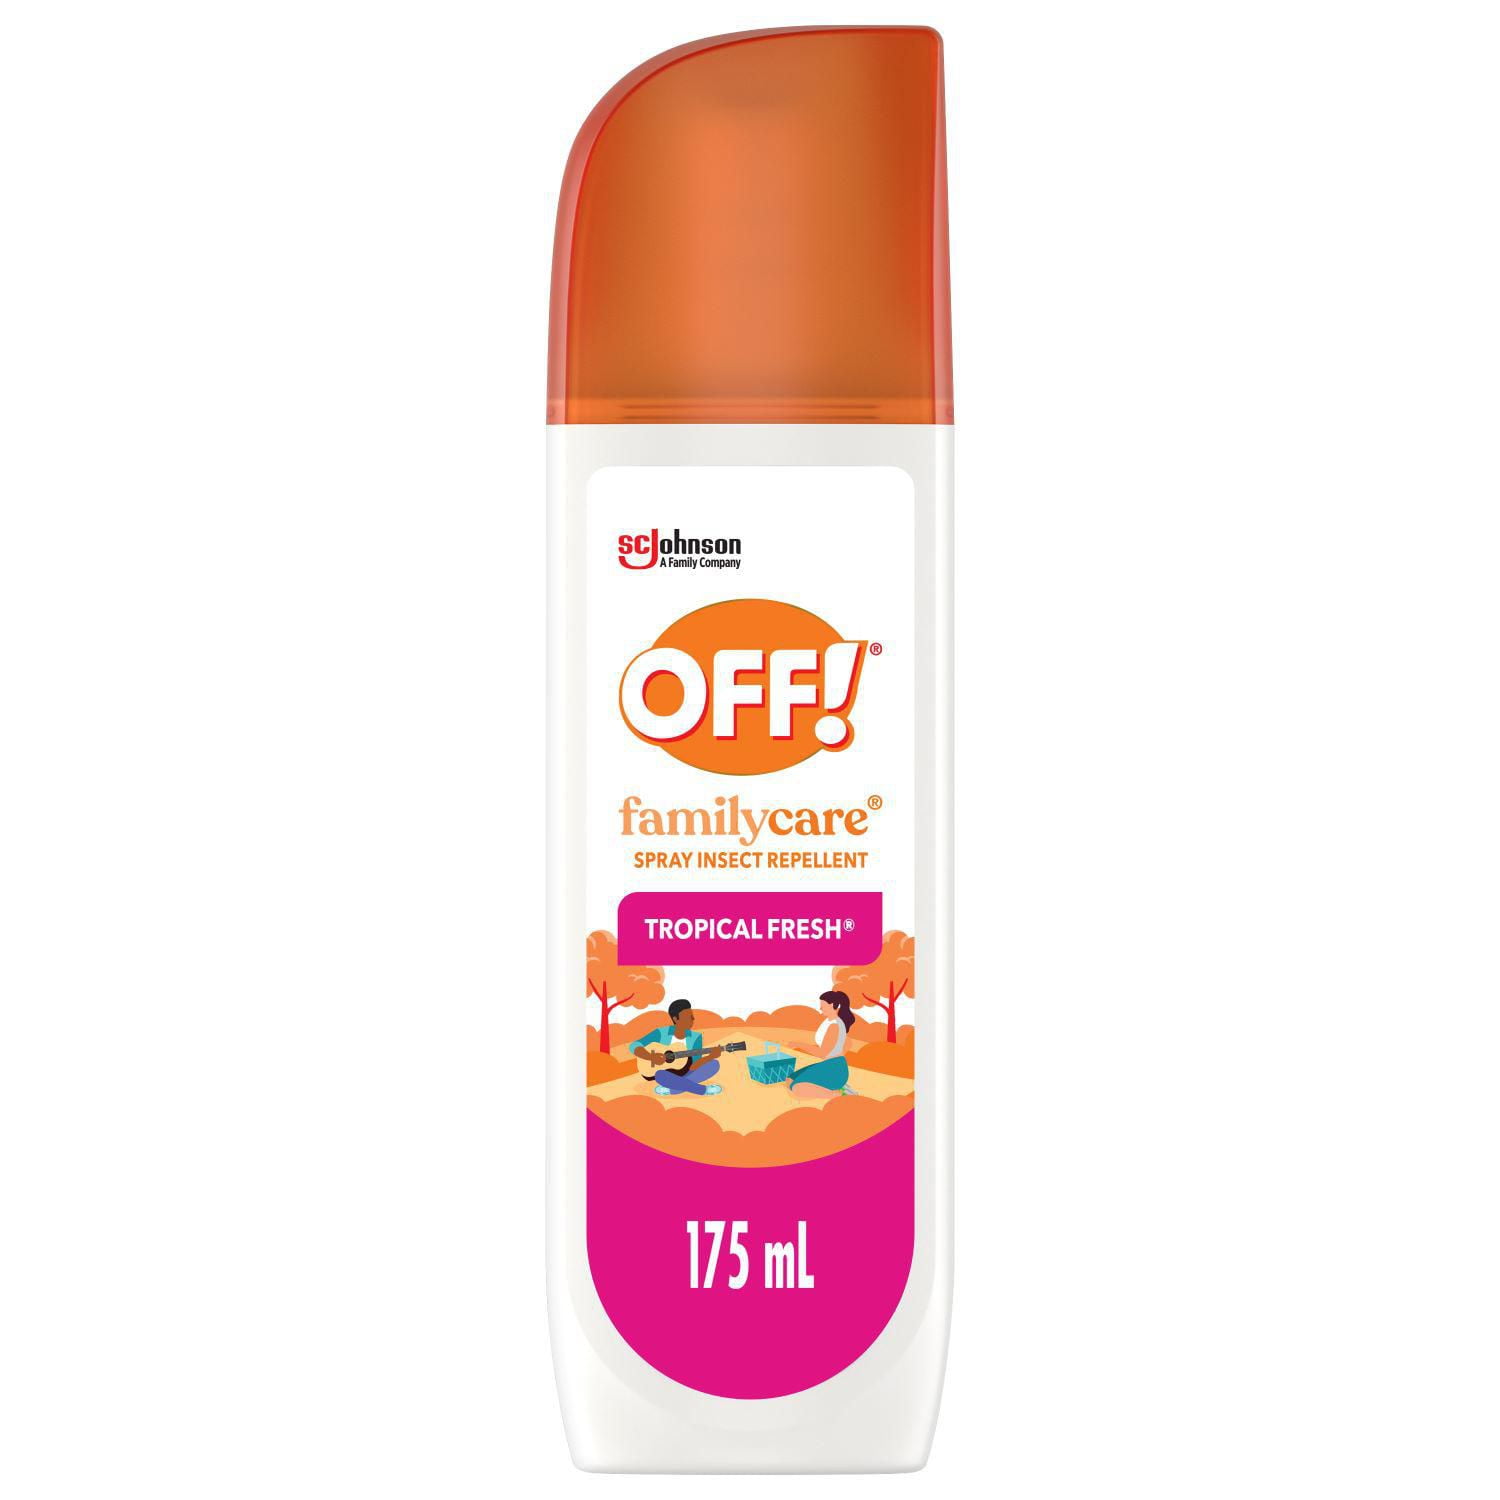 OFF! FamilyCare Insect Repellent, Tropical Scent, 175ml 